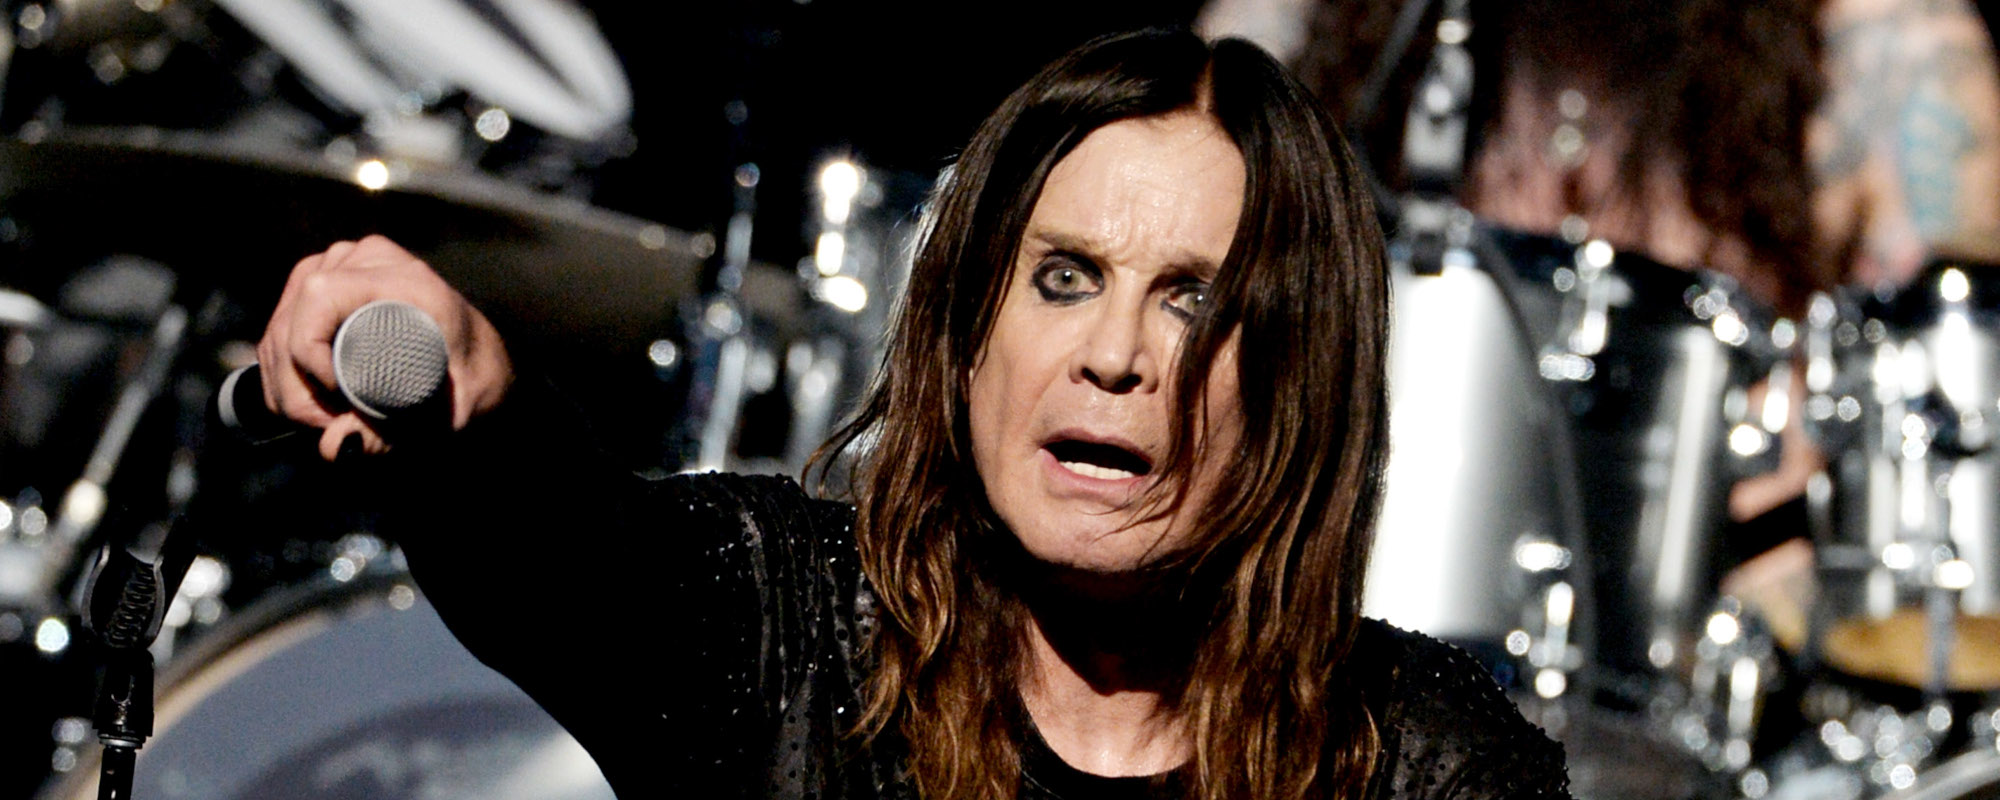 The Meaning Behind (the Tender Ballad!) “So Tired” by Ozzy Osbourne